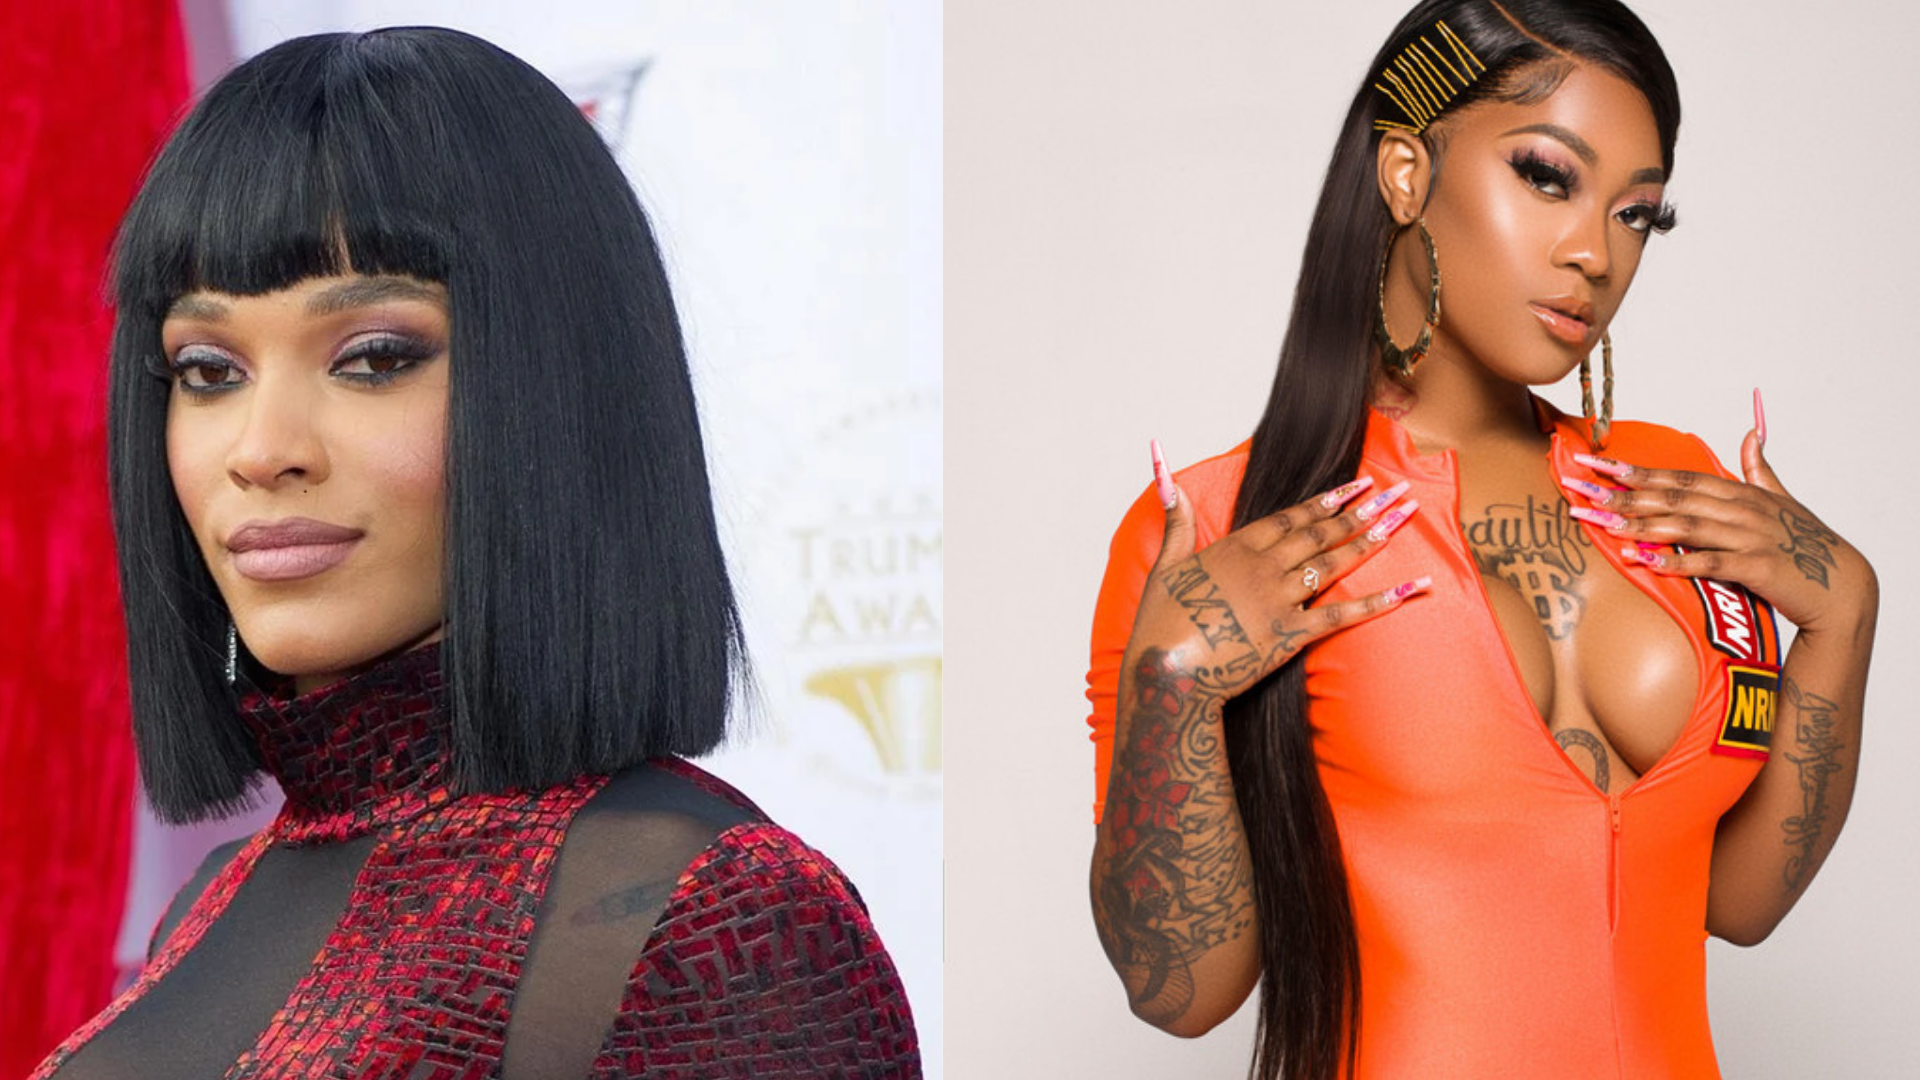 Who are Joseline Hernandez and Big Lex?